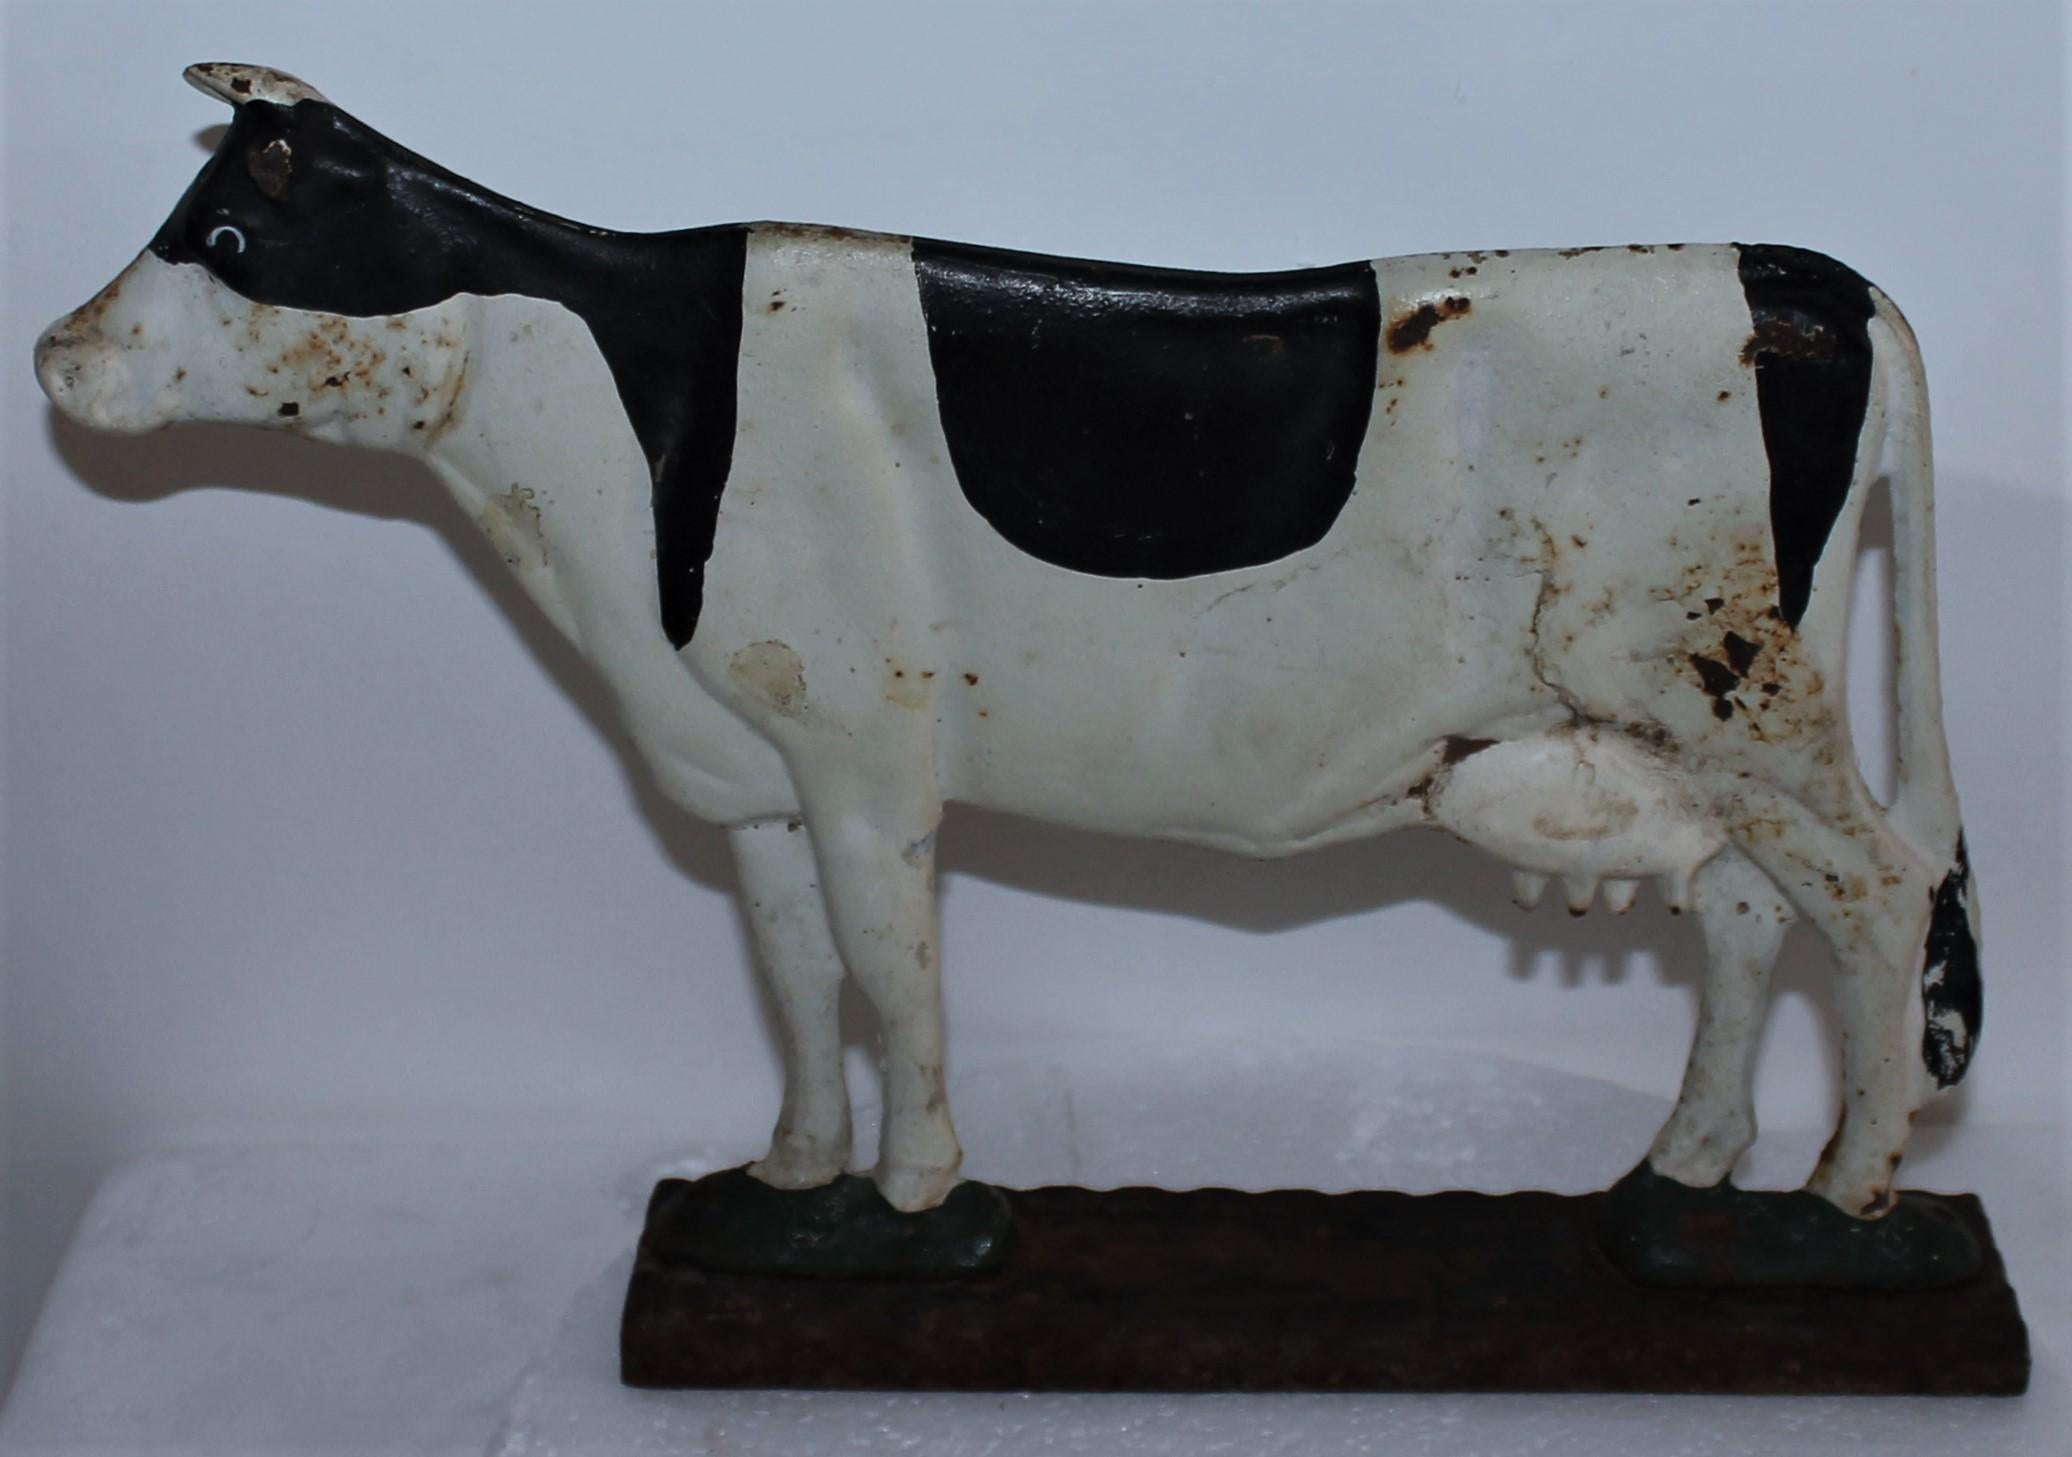 20Thc Original painted cast iron double sided cow doorstop. The base paint is worn off and minor paint loss in areas of the cow.